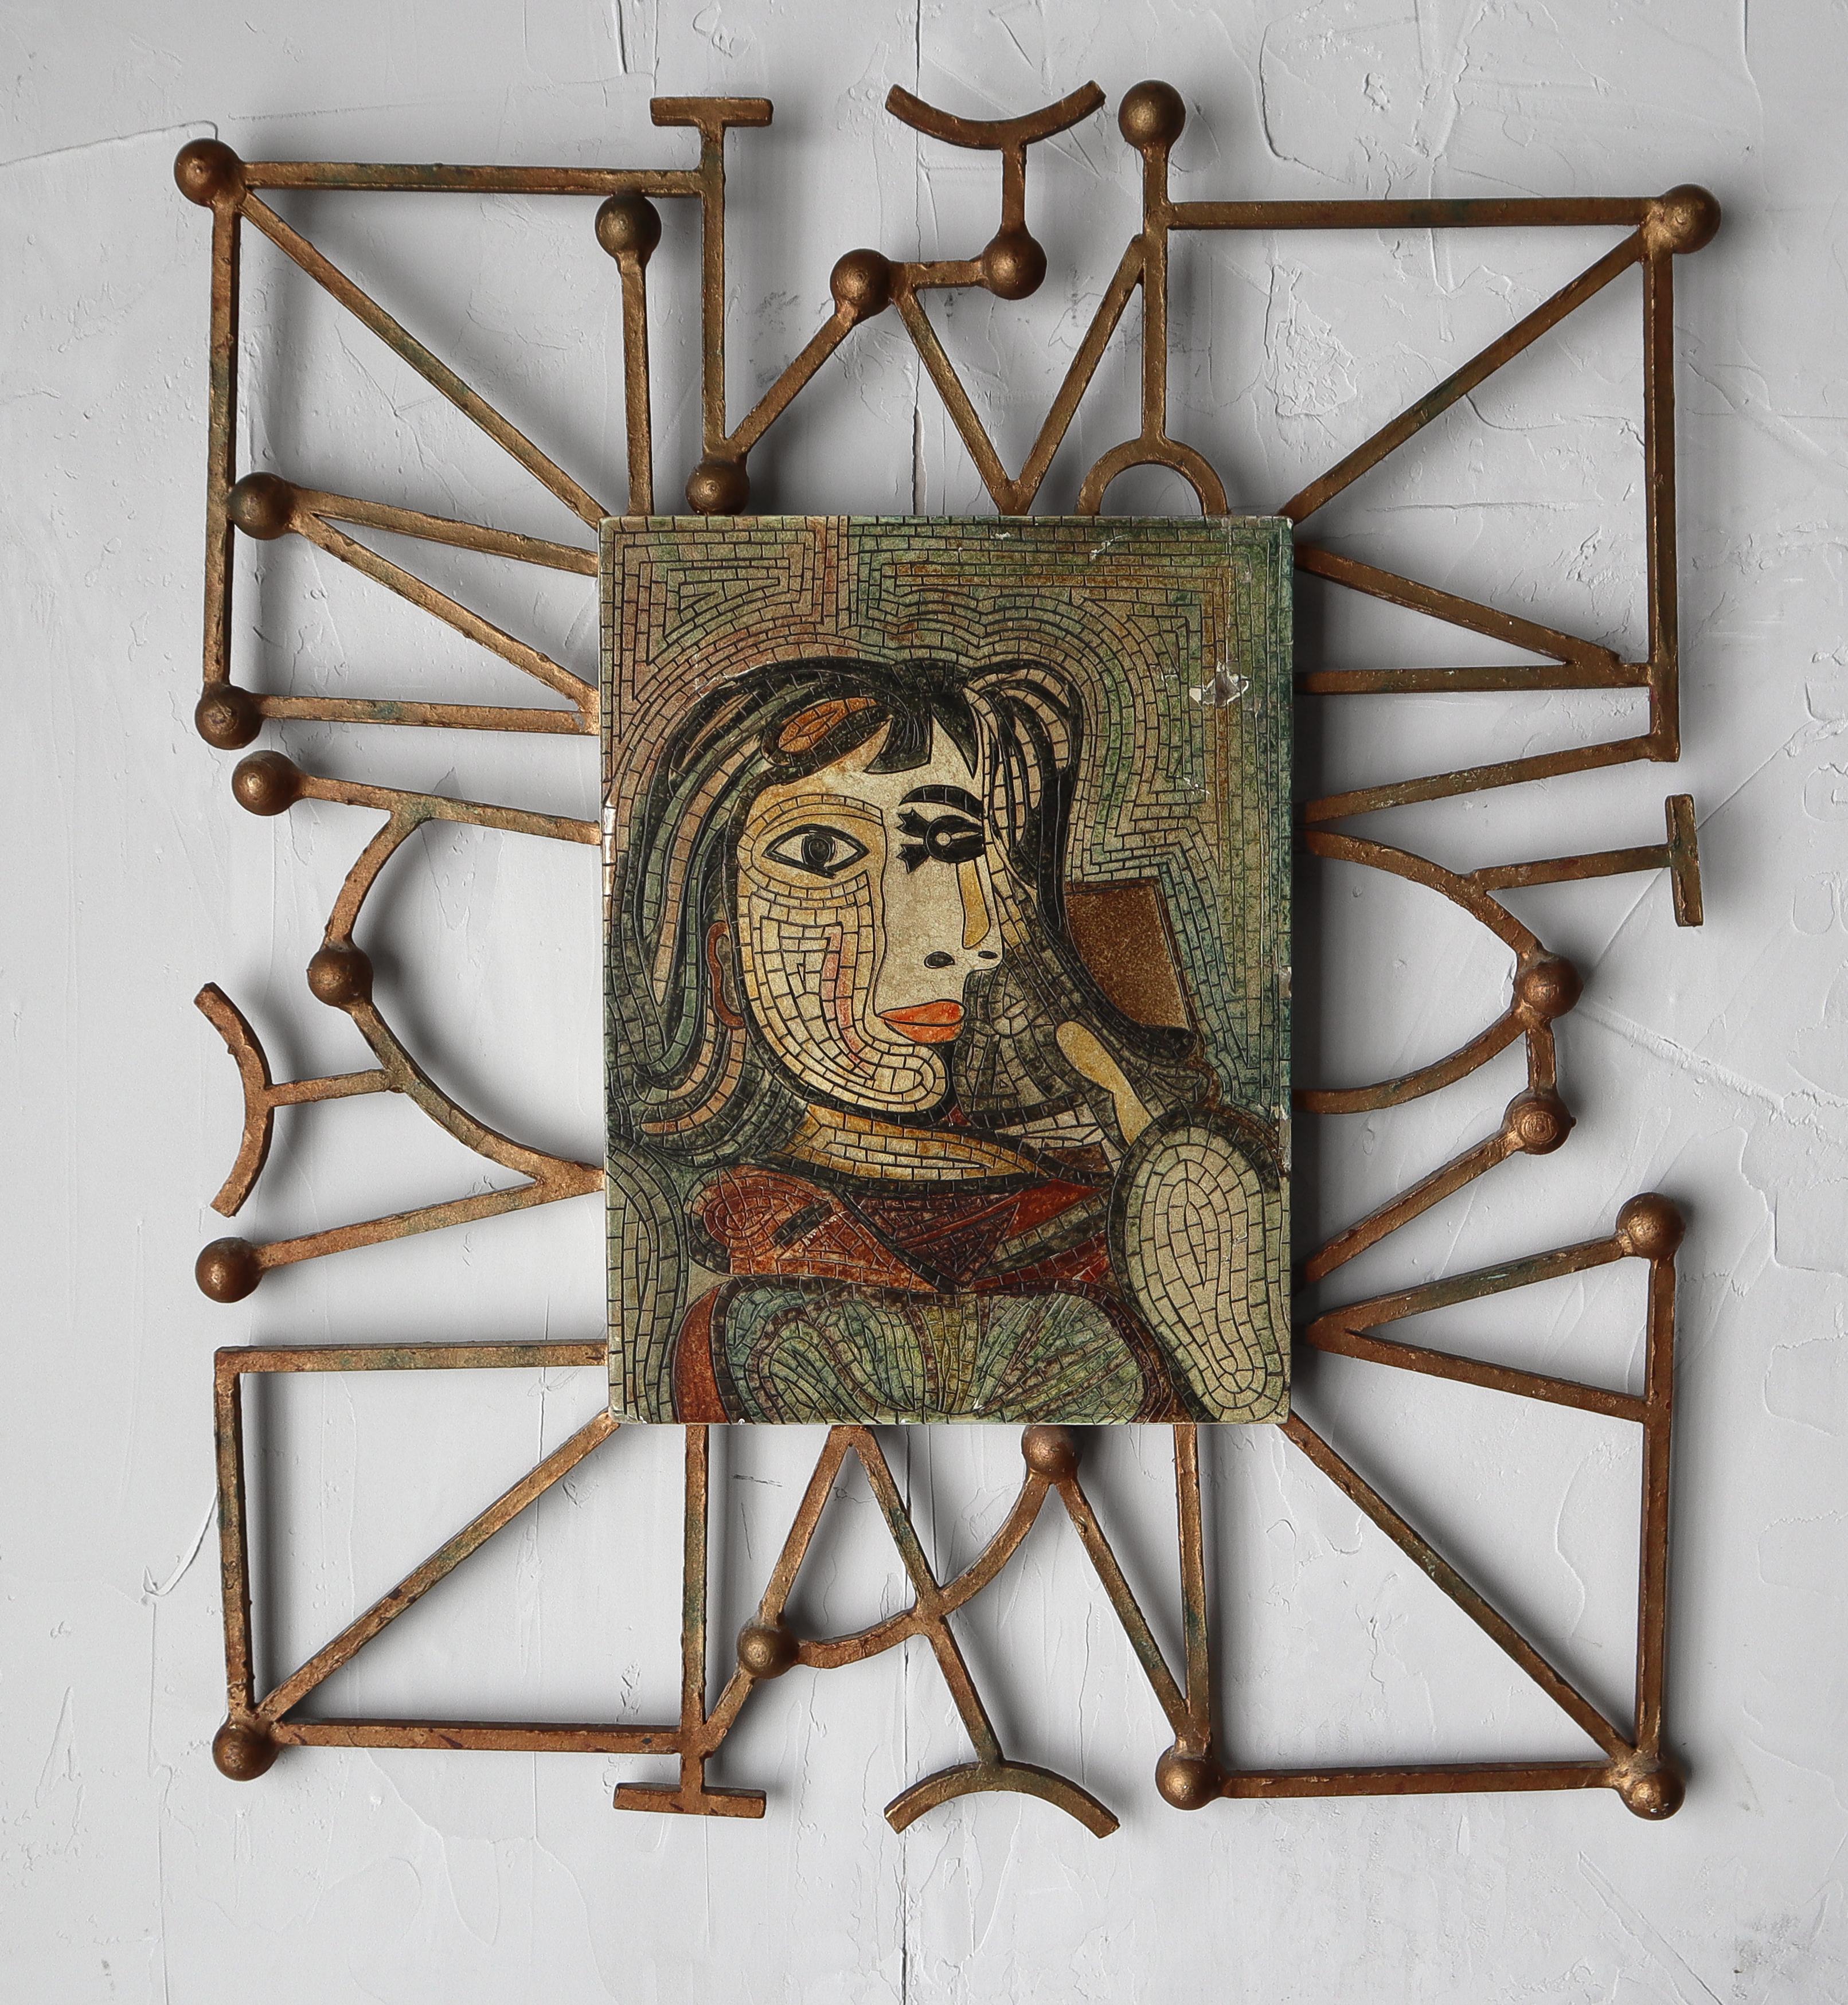 Unique art piece after Pablo Picasso, Woman With a Large Hat.  

Large ceramic tile, carved and painted to look like a mosaic mounted in a brutalist style metal frame.

*2nd Larger piece also available, see last image

Art piece is in good overall